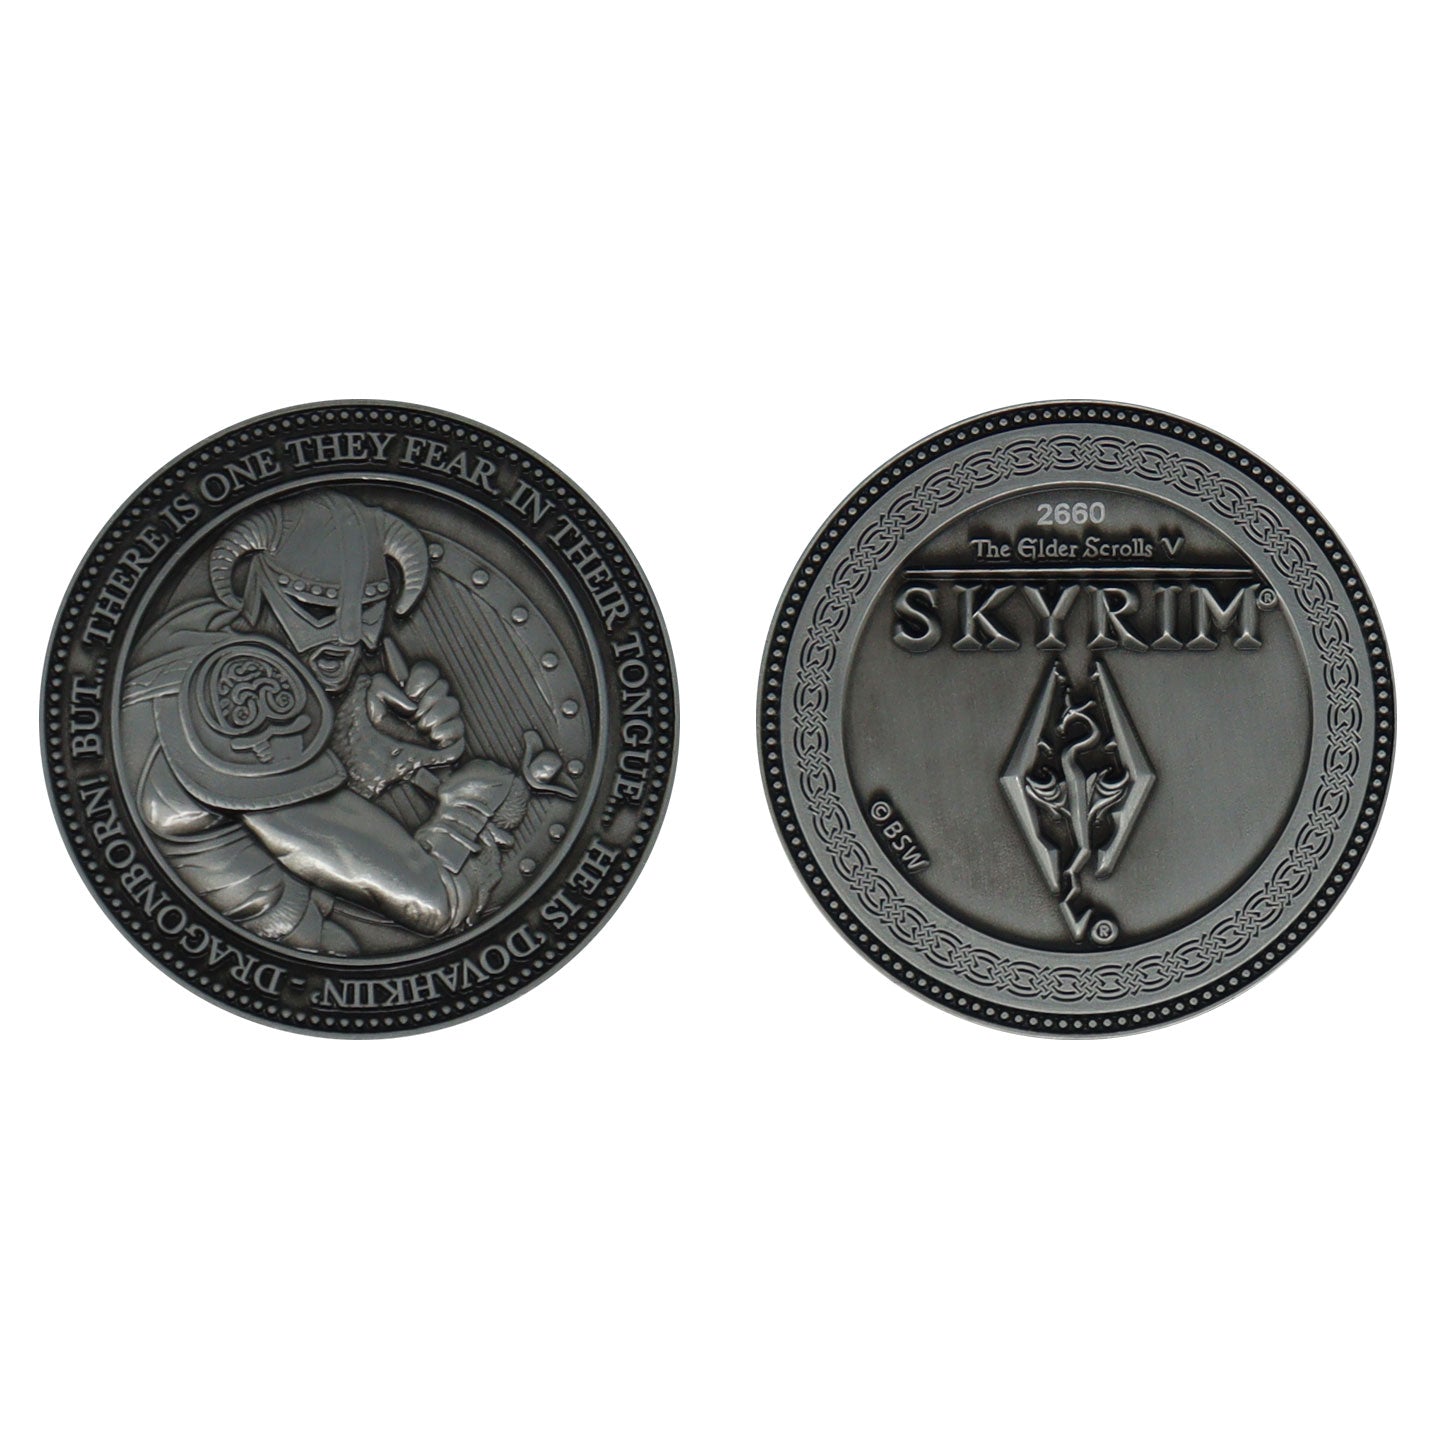 The Elder Scrolls V: Skyrim Limited Edition Collectible Coin